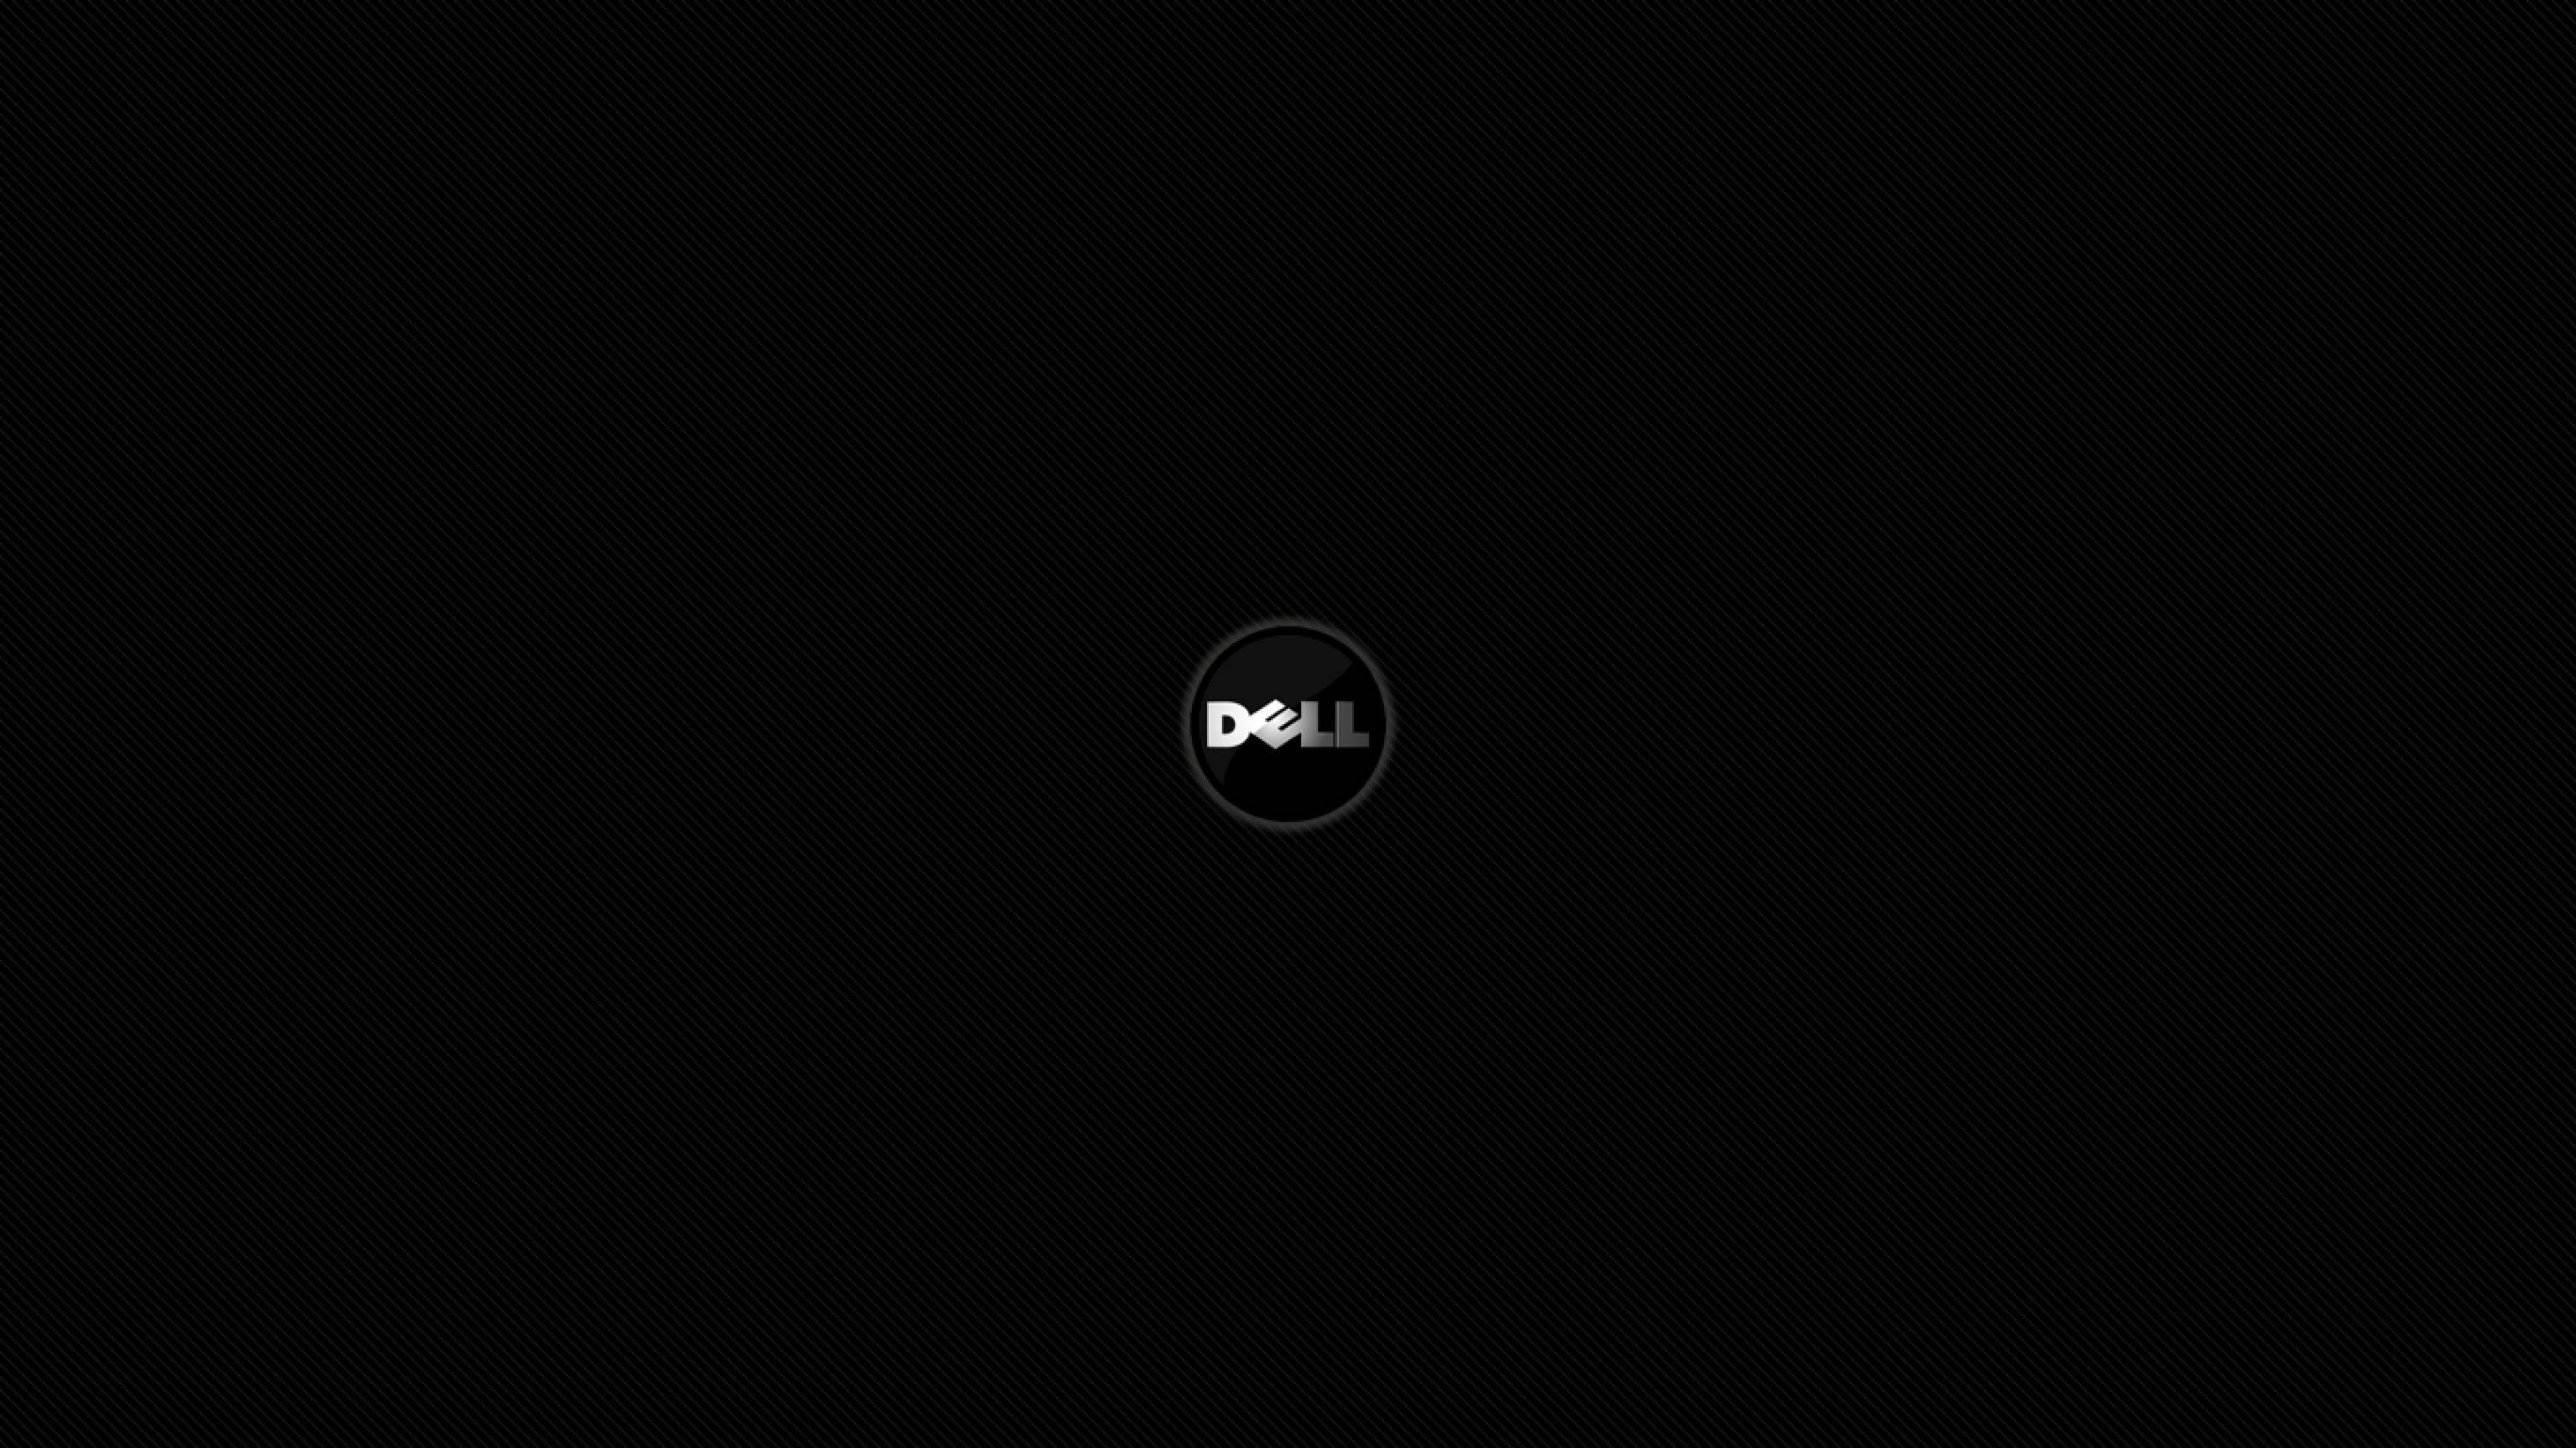 Dell Latitude Hd Wallpapers Top Free Dell Latitude Hd Backgrounds Wallpaperaccess